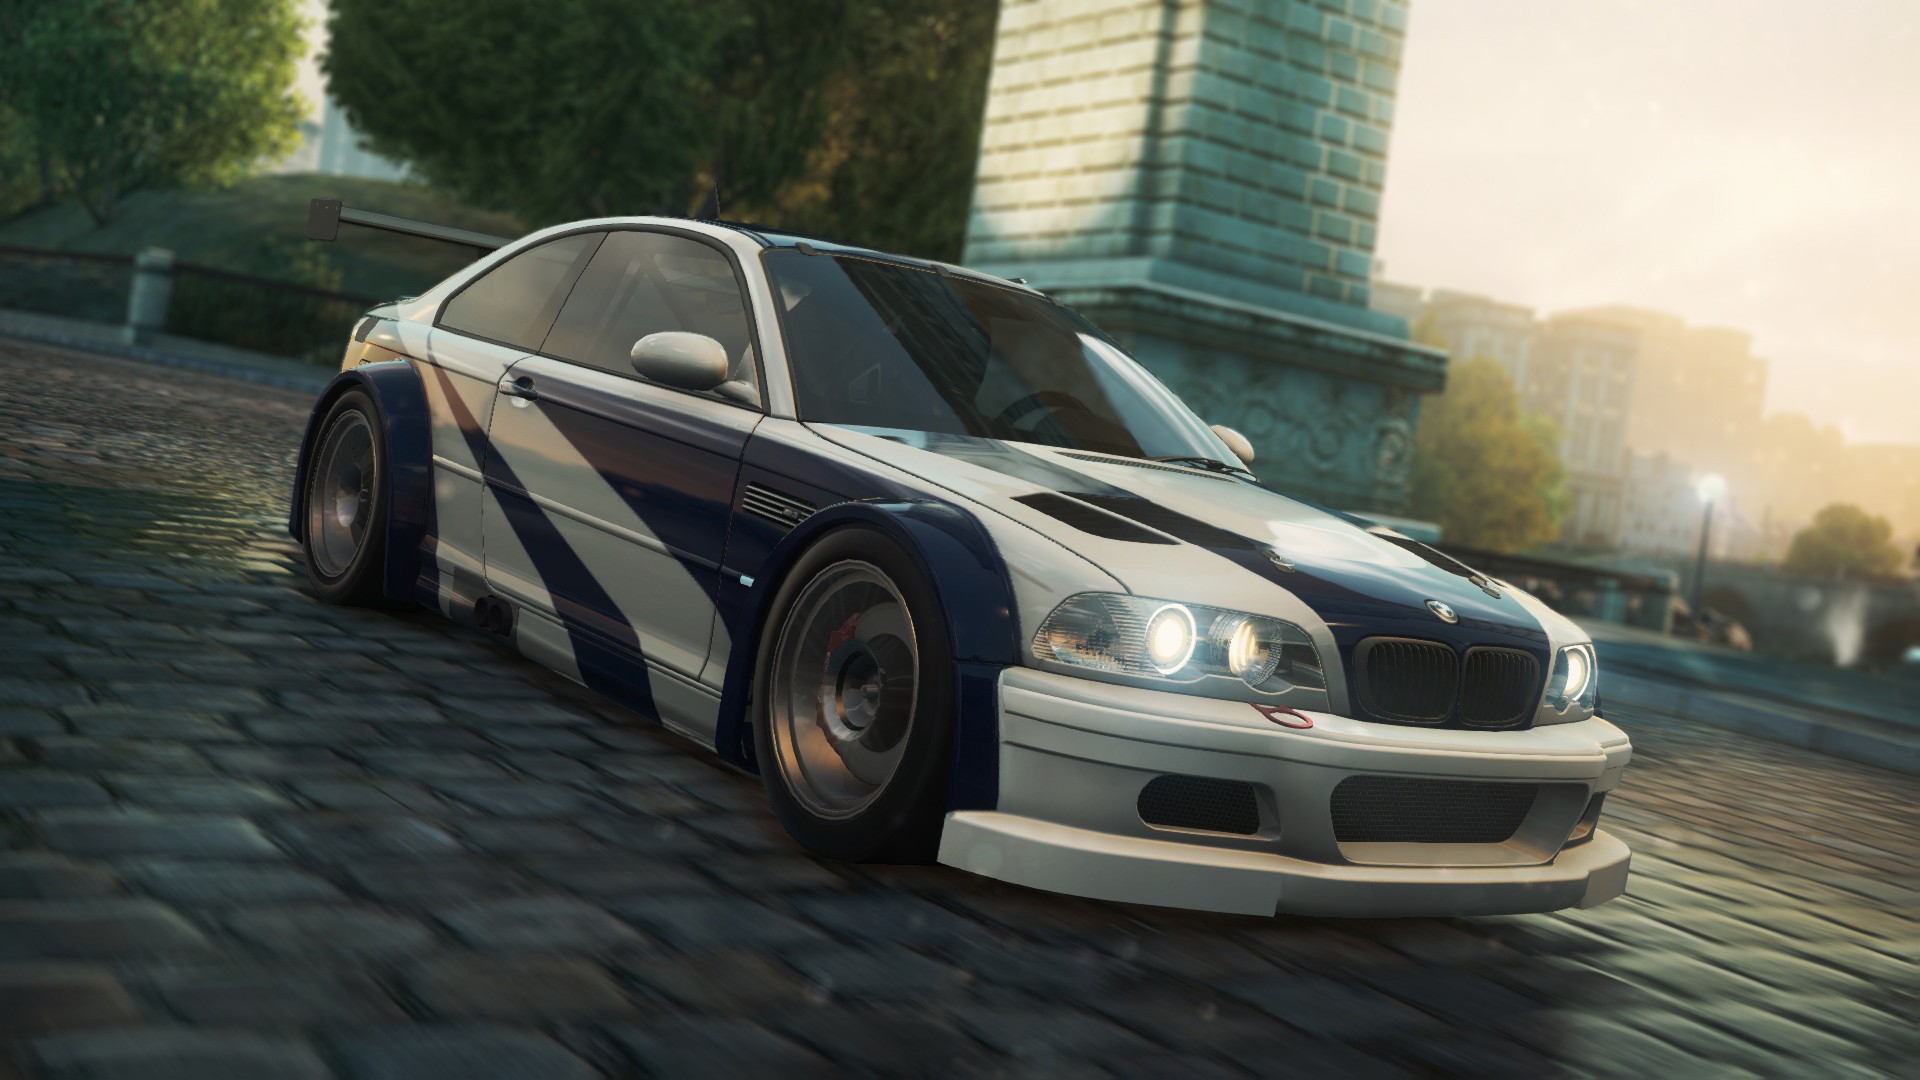 50+ Need For Speed: Most Wanted HD Wallpapers and Backgrounds